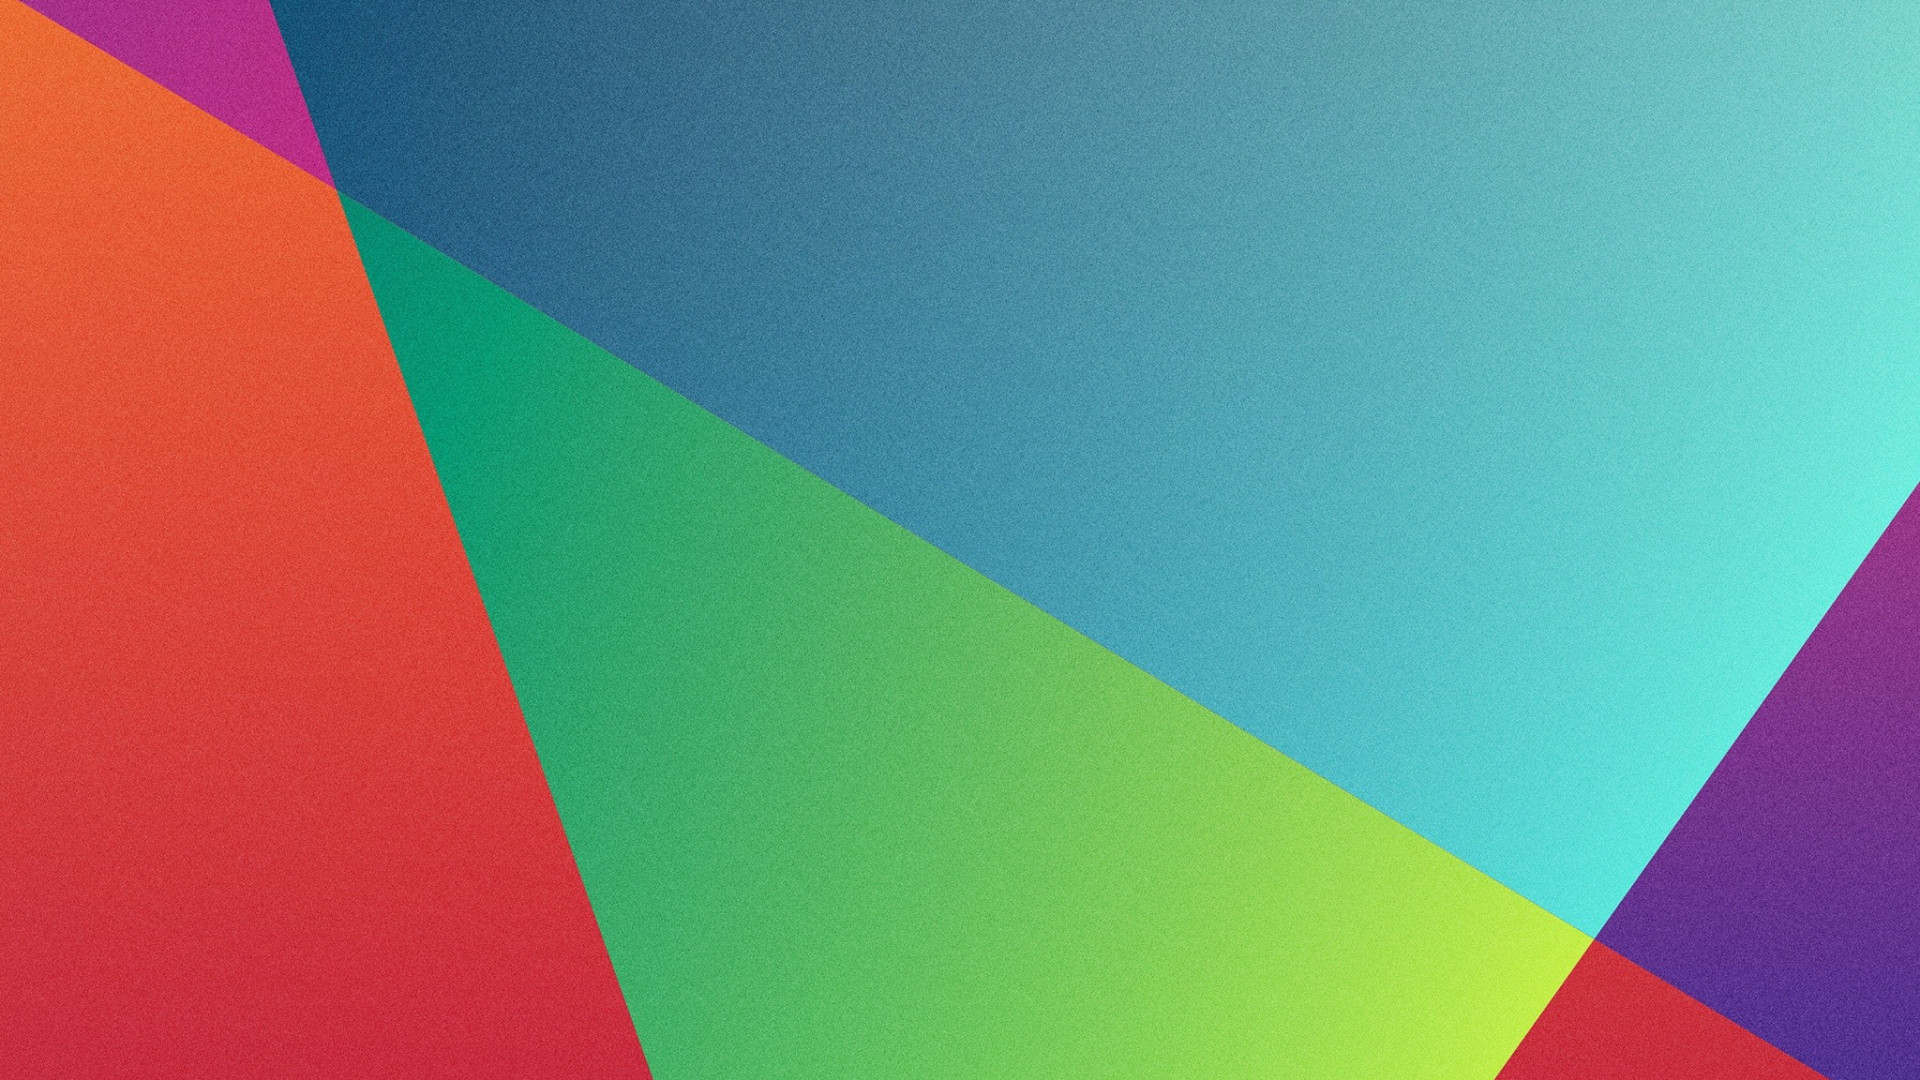 Wallpaper polygon, 4k, HD wallpaper, android wallpaper, triangle, background,  orange, red, blue, pattern, OS #3519